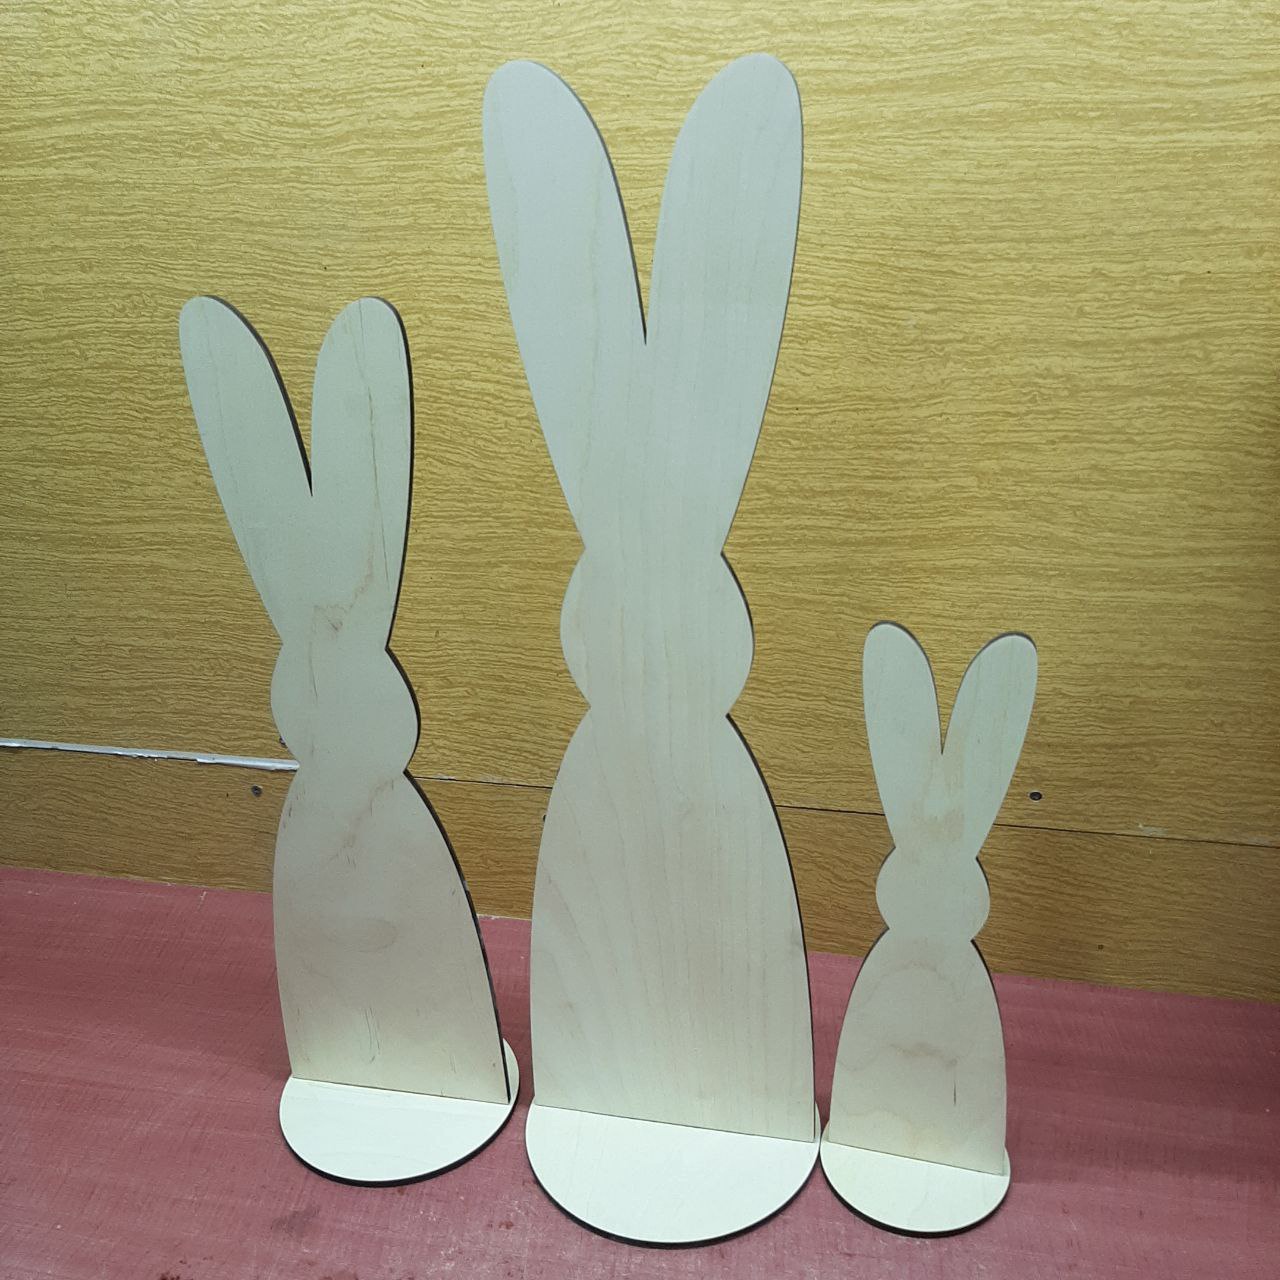 Laser Cut Decorative Standing Easter Bunny Free Vector